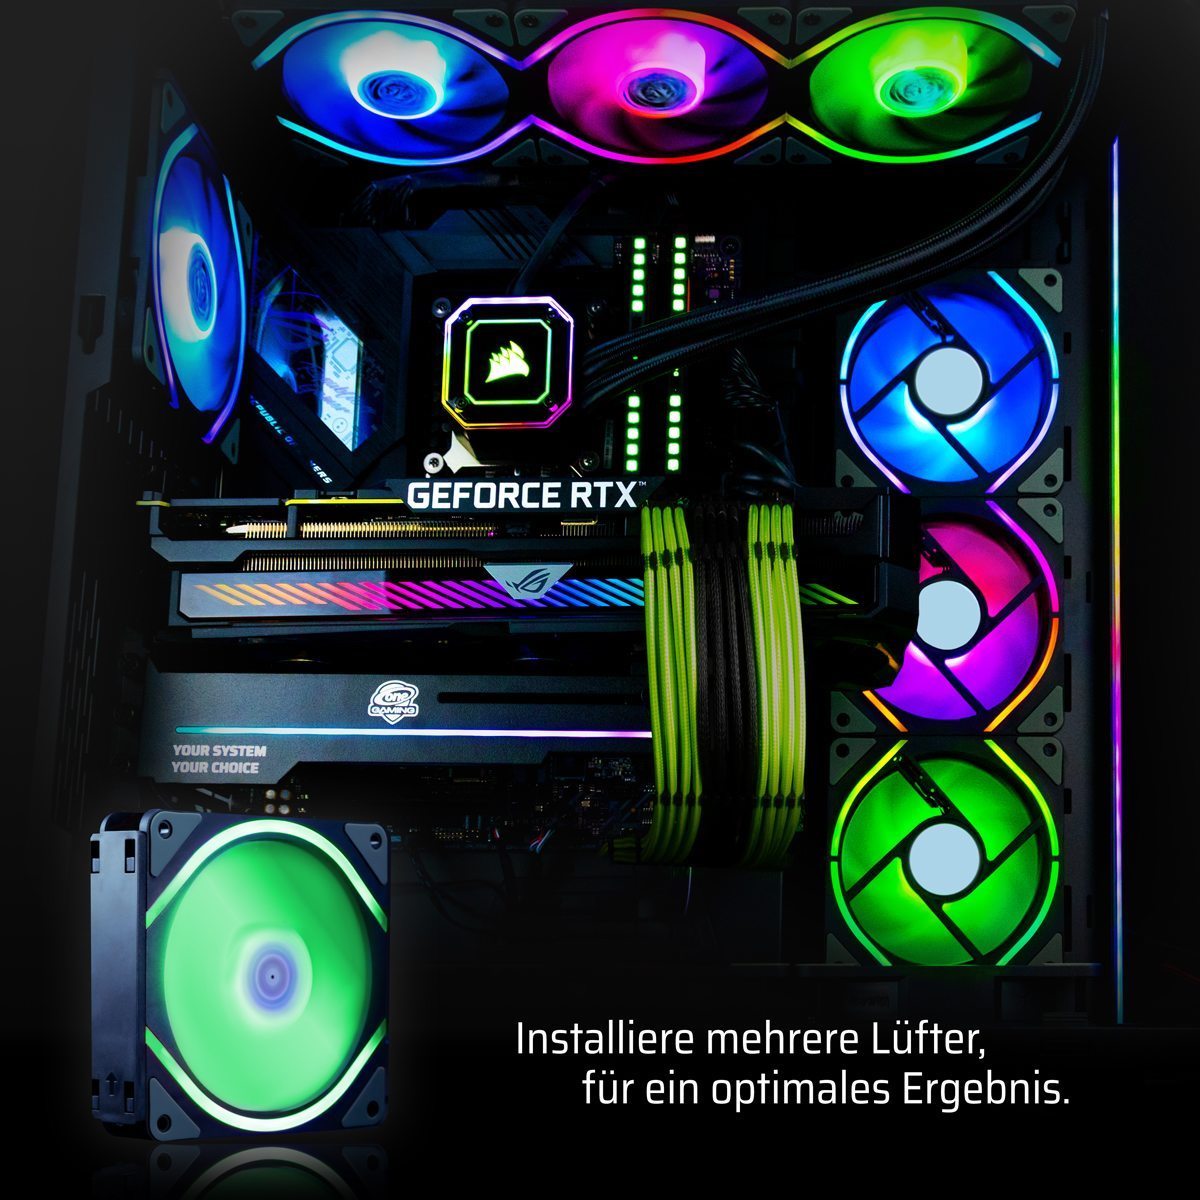 RGB-Lüfter ONE GAMING Angel Eyes 12 black inkl. Connect Modul